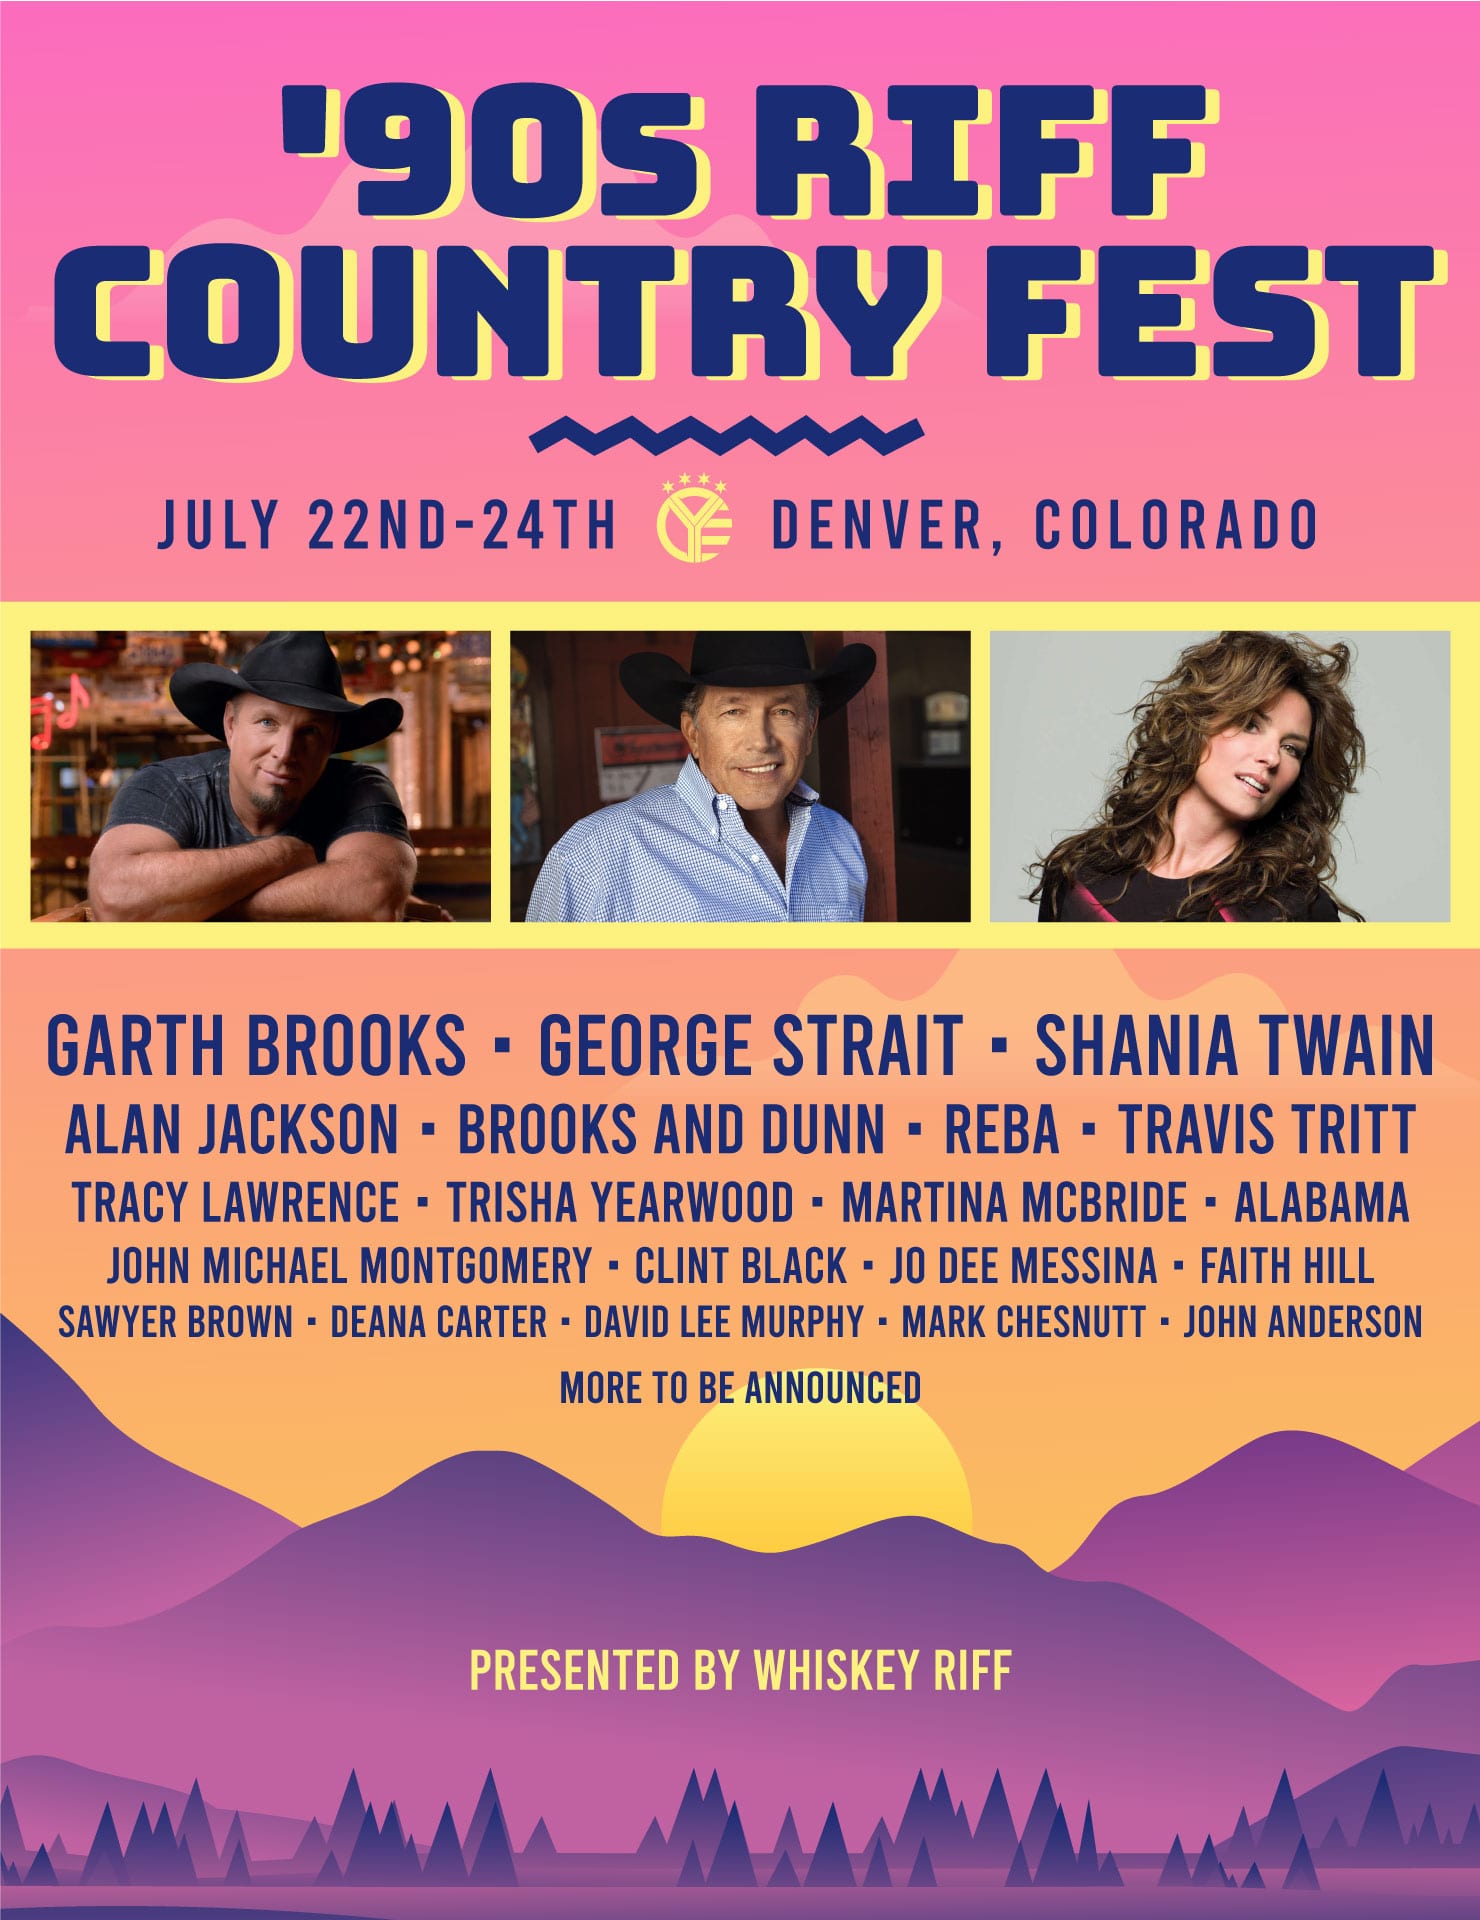 A poster with George Strait, Shania Twain, Garth Brooks in a boat